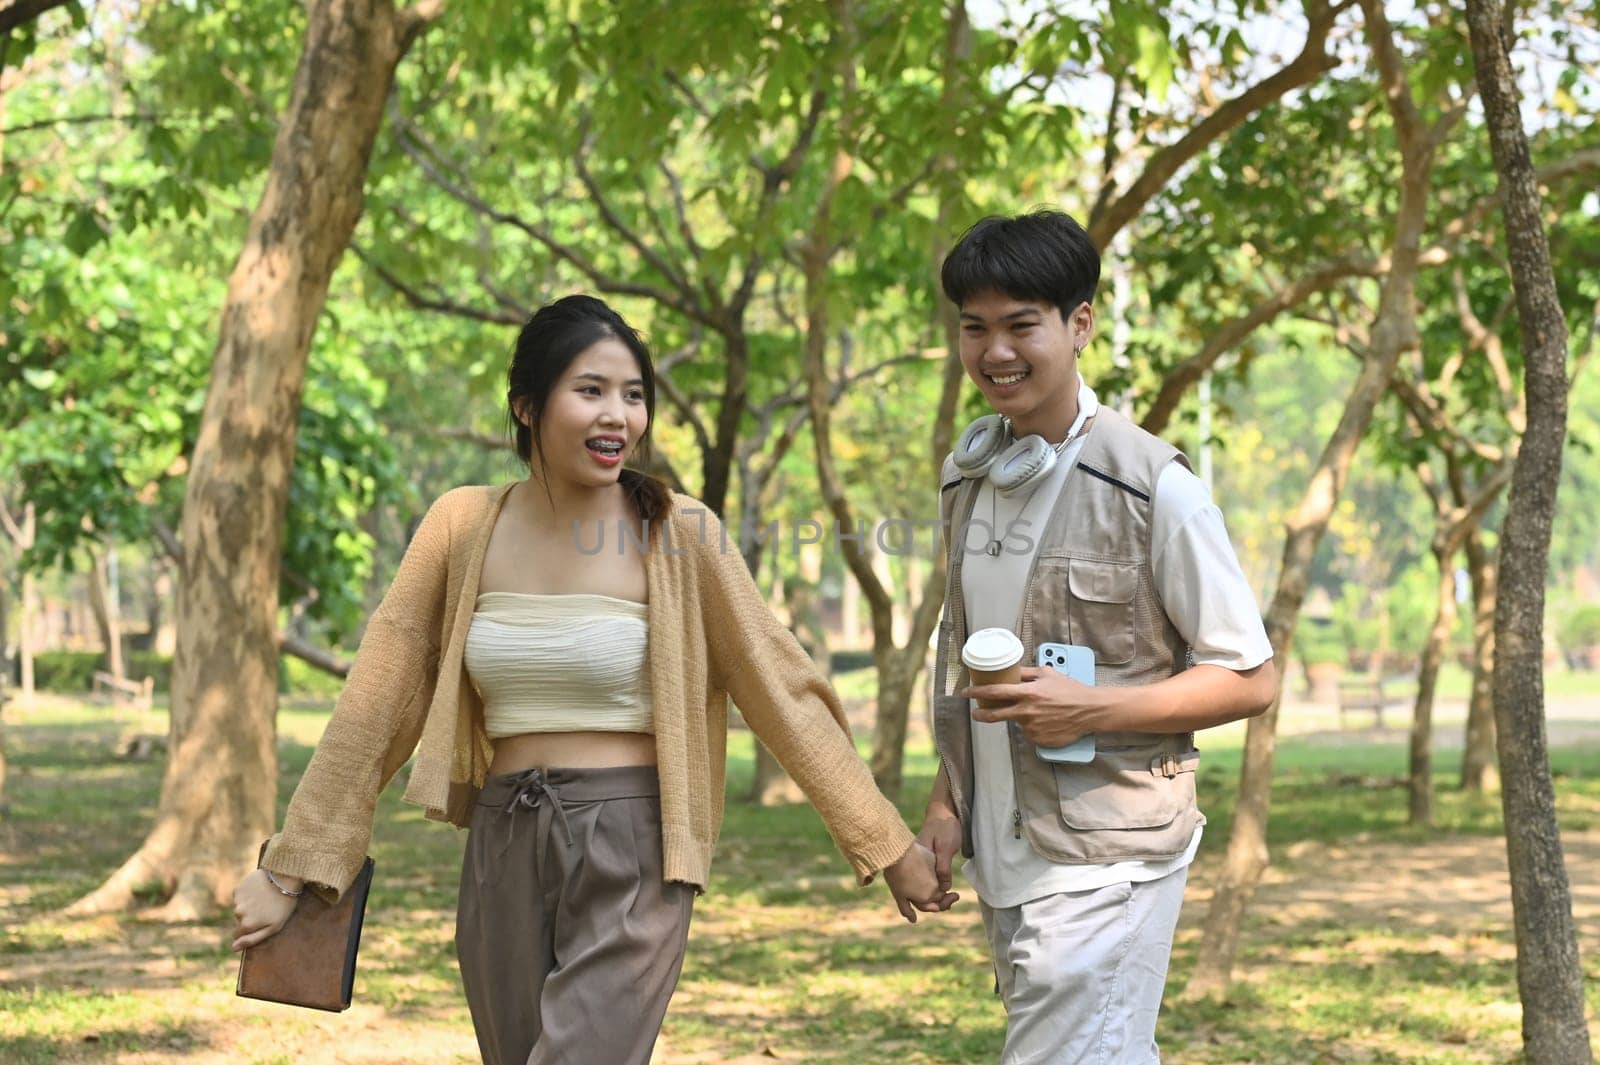 Portrait of a cheerful young couple in Love holding hands and walking in summer green park.